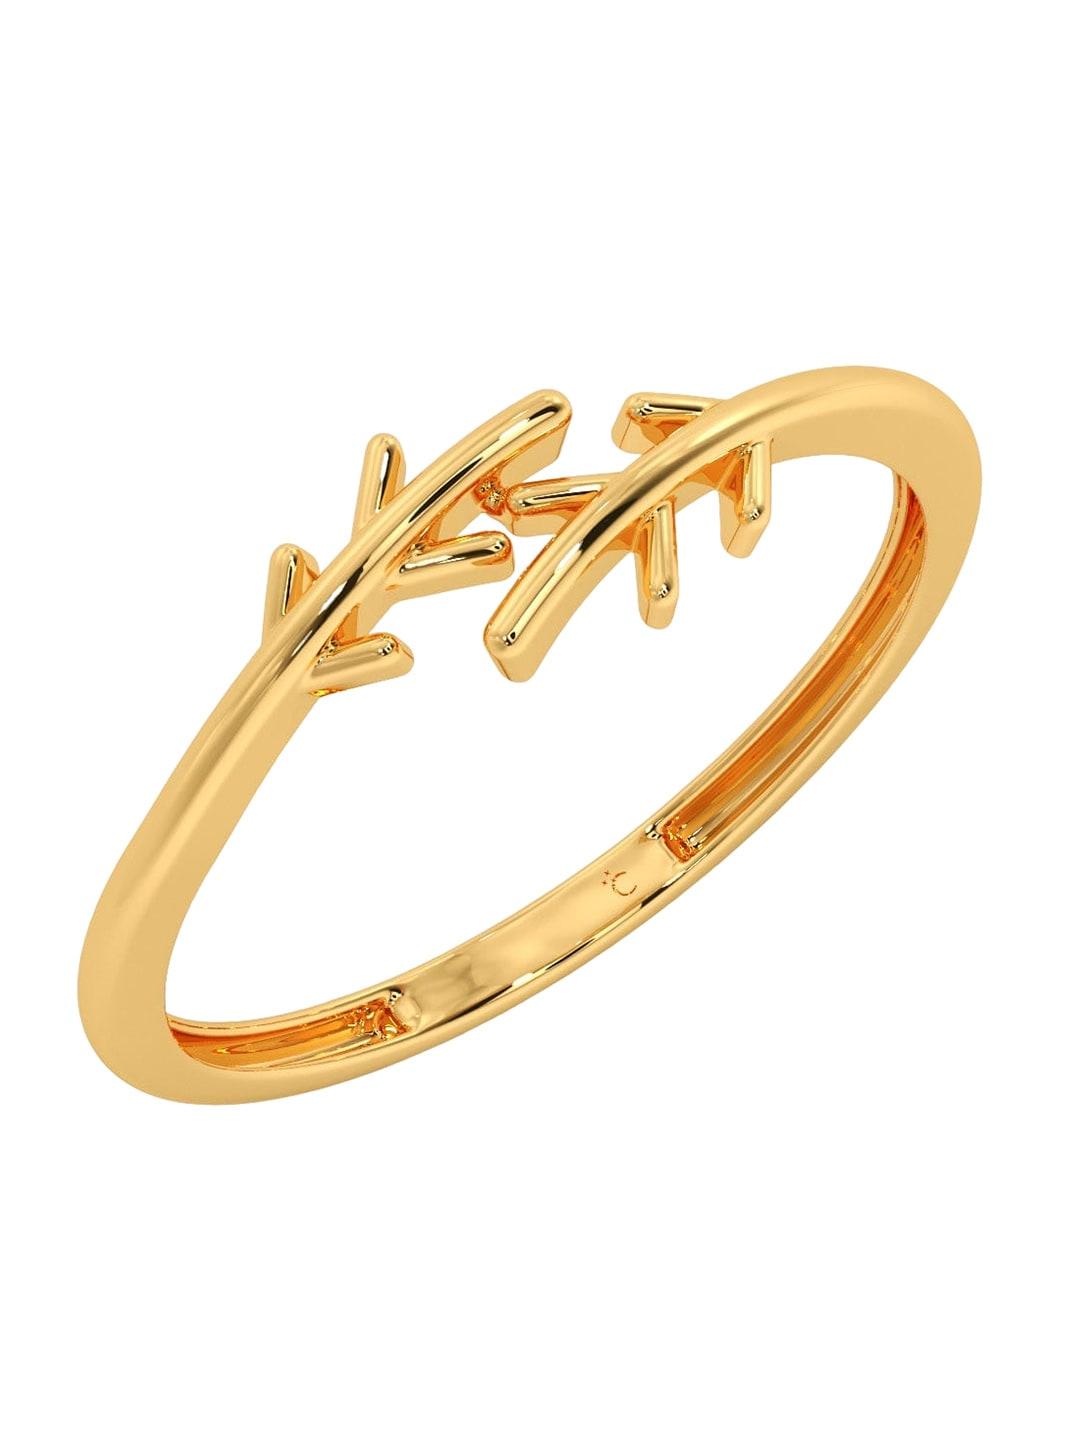 candere-a-kalyan-jewellers-company-18kt-gold-ring-0.64gm